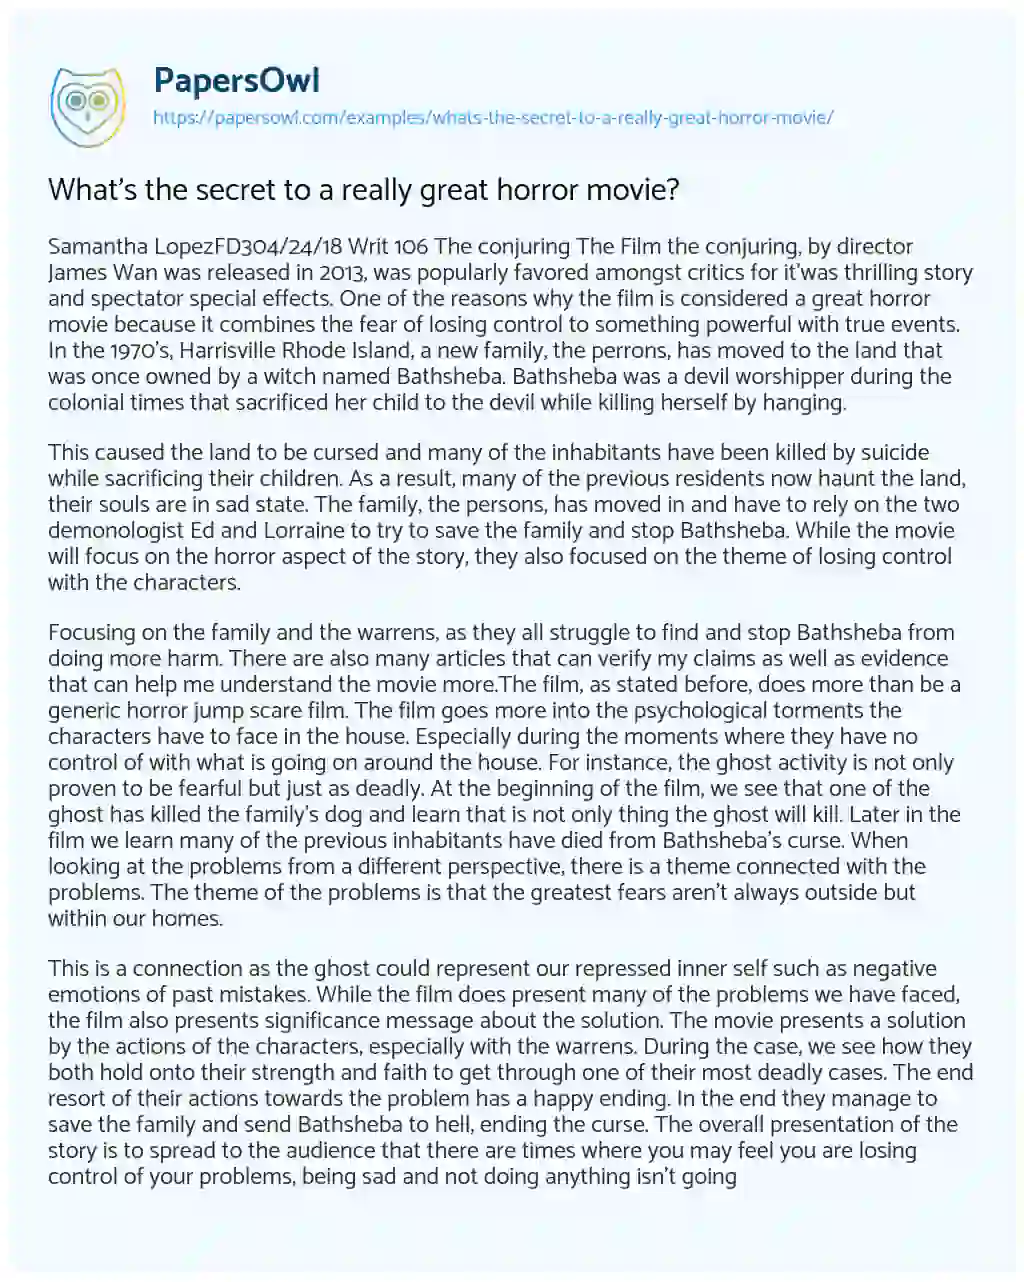 Essay on What’s the Secret to a Really Great Horror Movie?